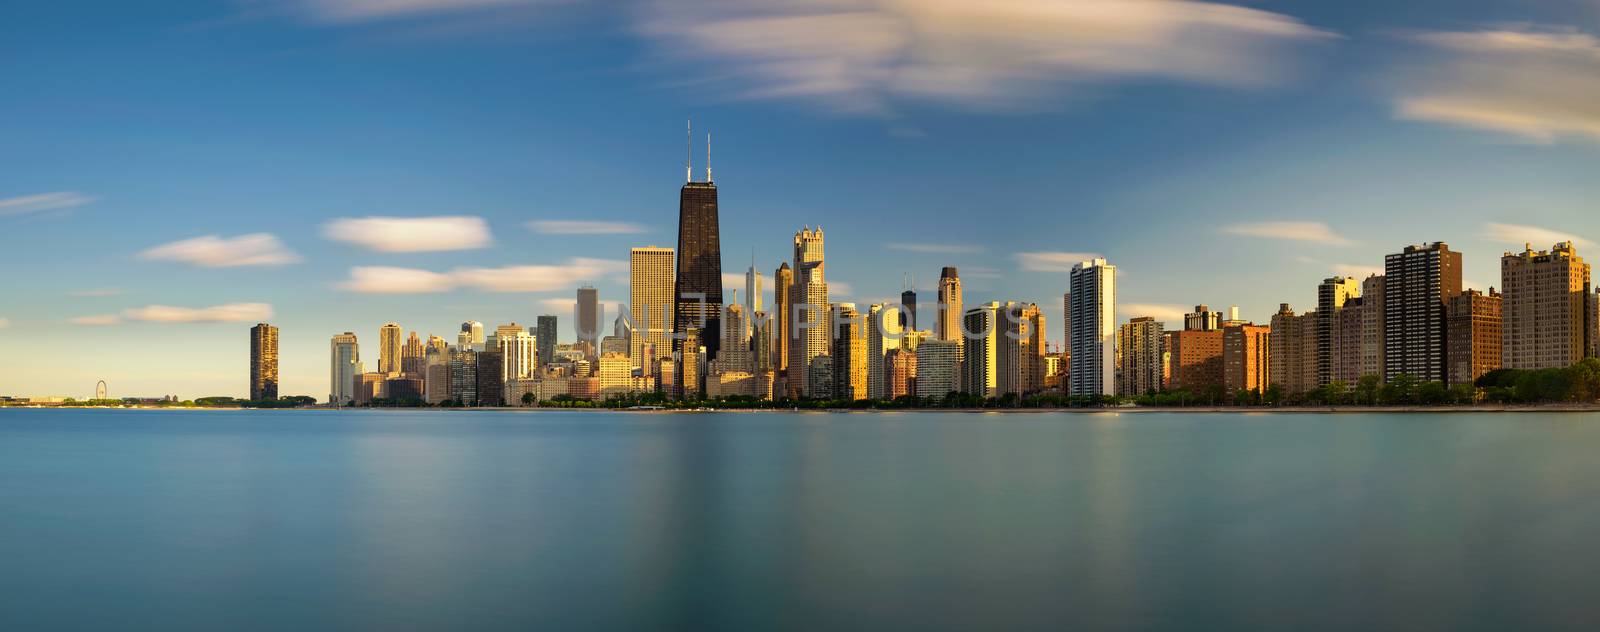 Chicago skyline at sunset viewed from North Avenue Beach by nickfox